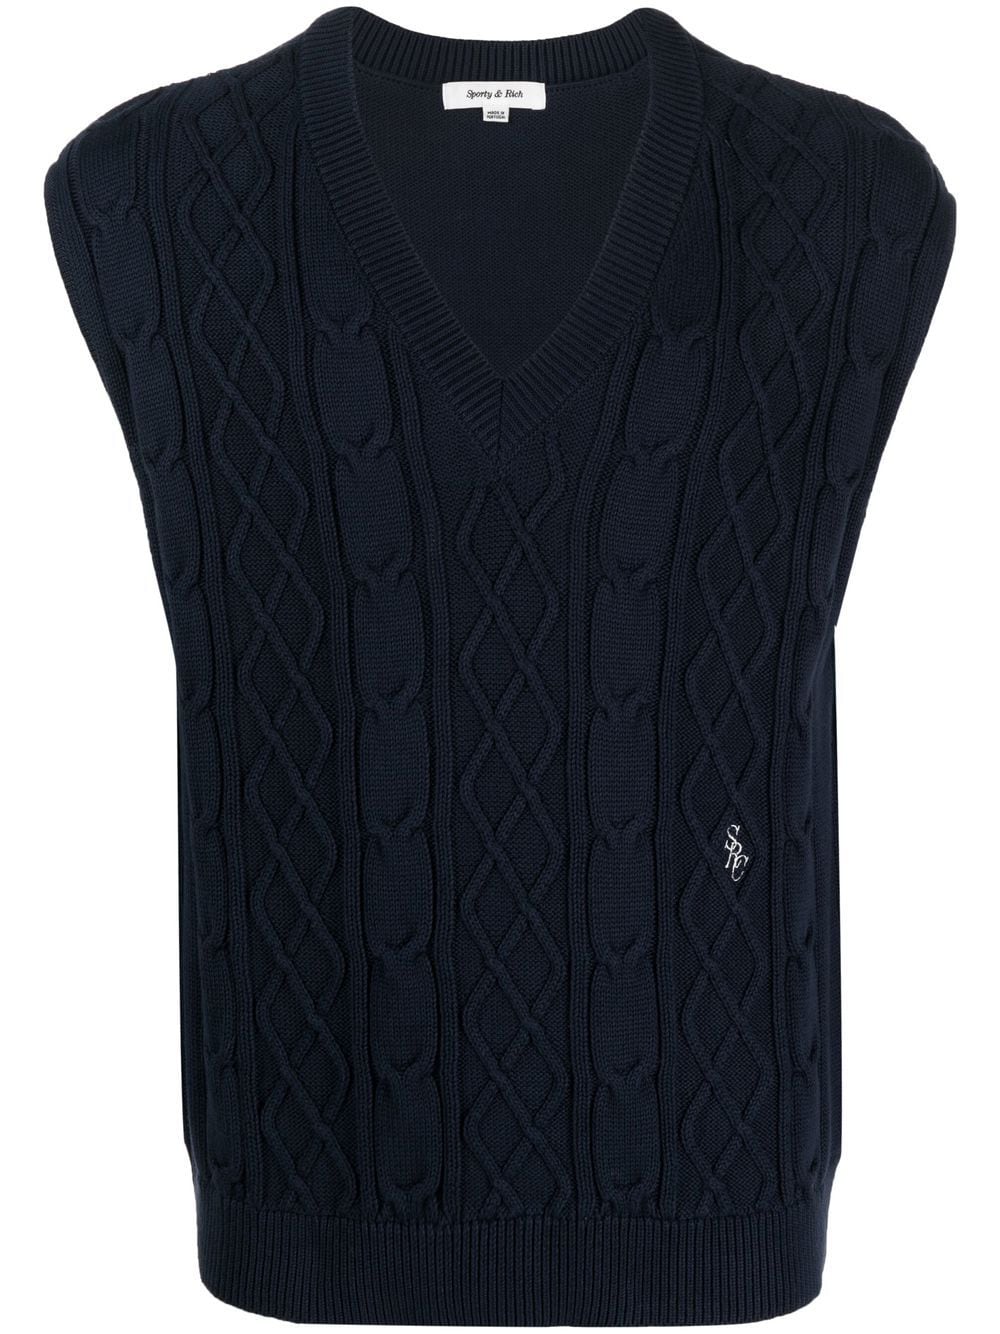 Sporty & Rich embroidered-logo cable-knit vest - Blue von Sporty & Rich